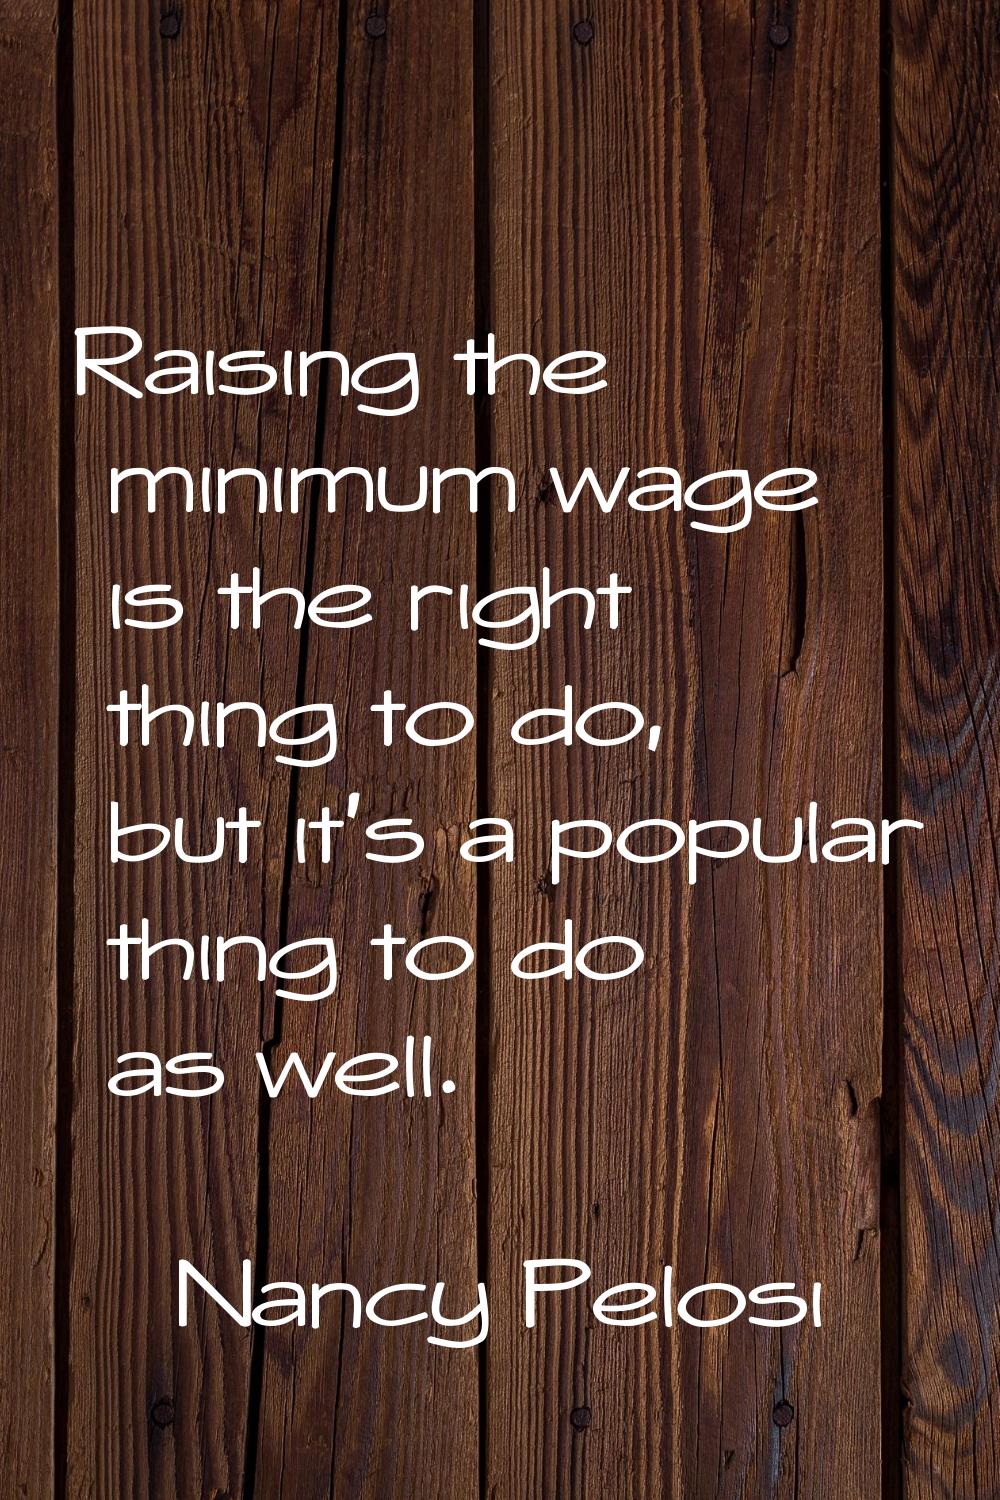 Raising the minimum wage is the right thing to do, but it's a popular thing to do as well.